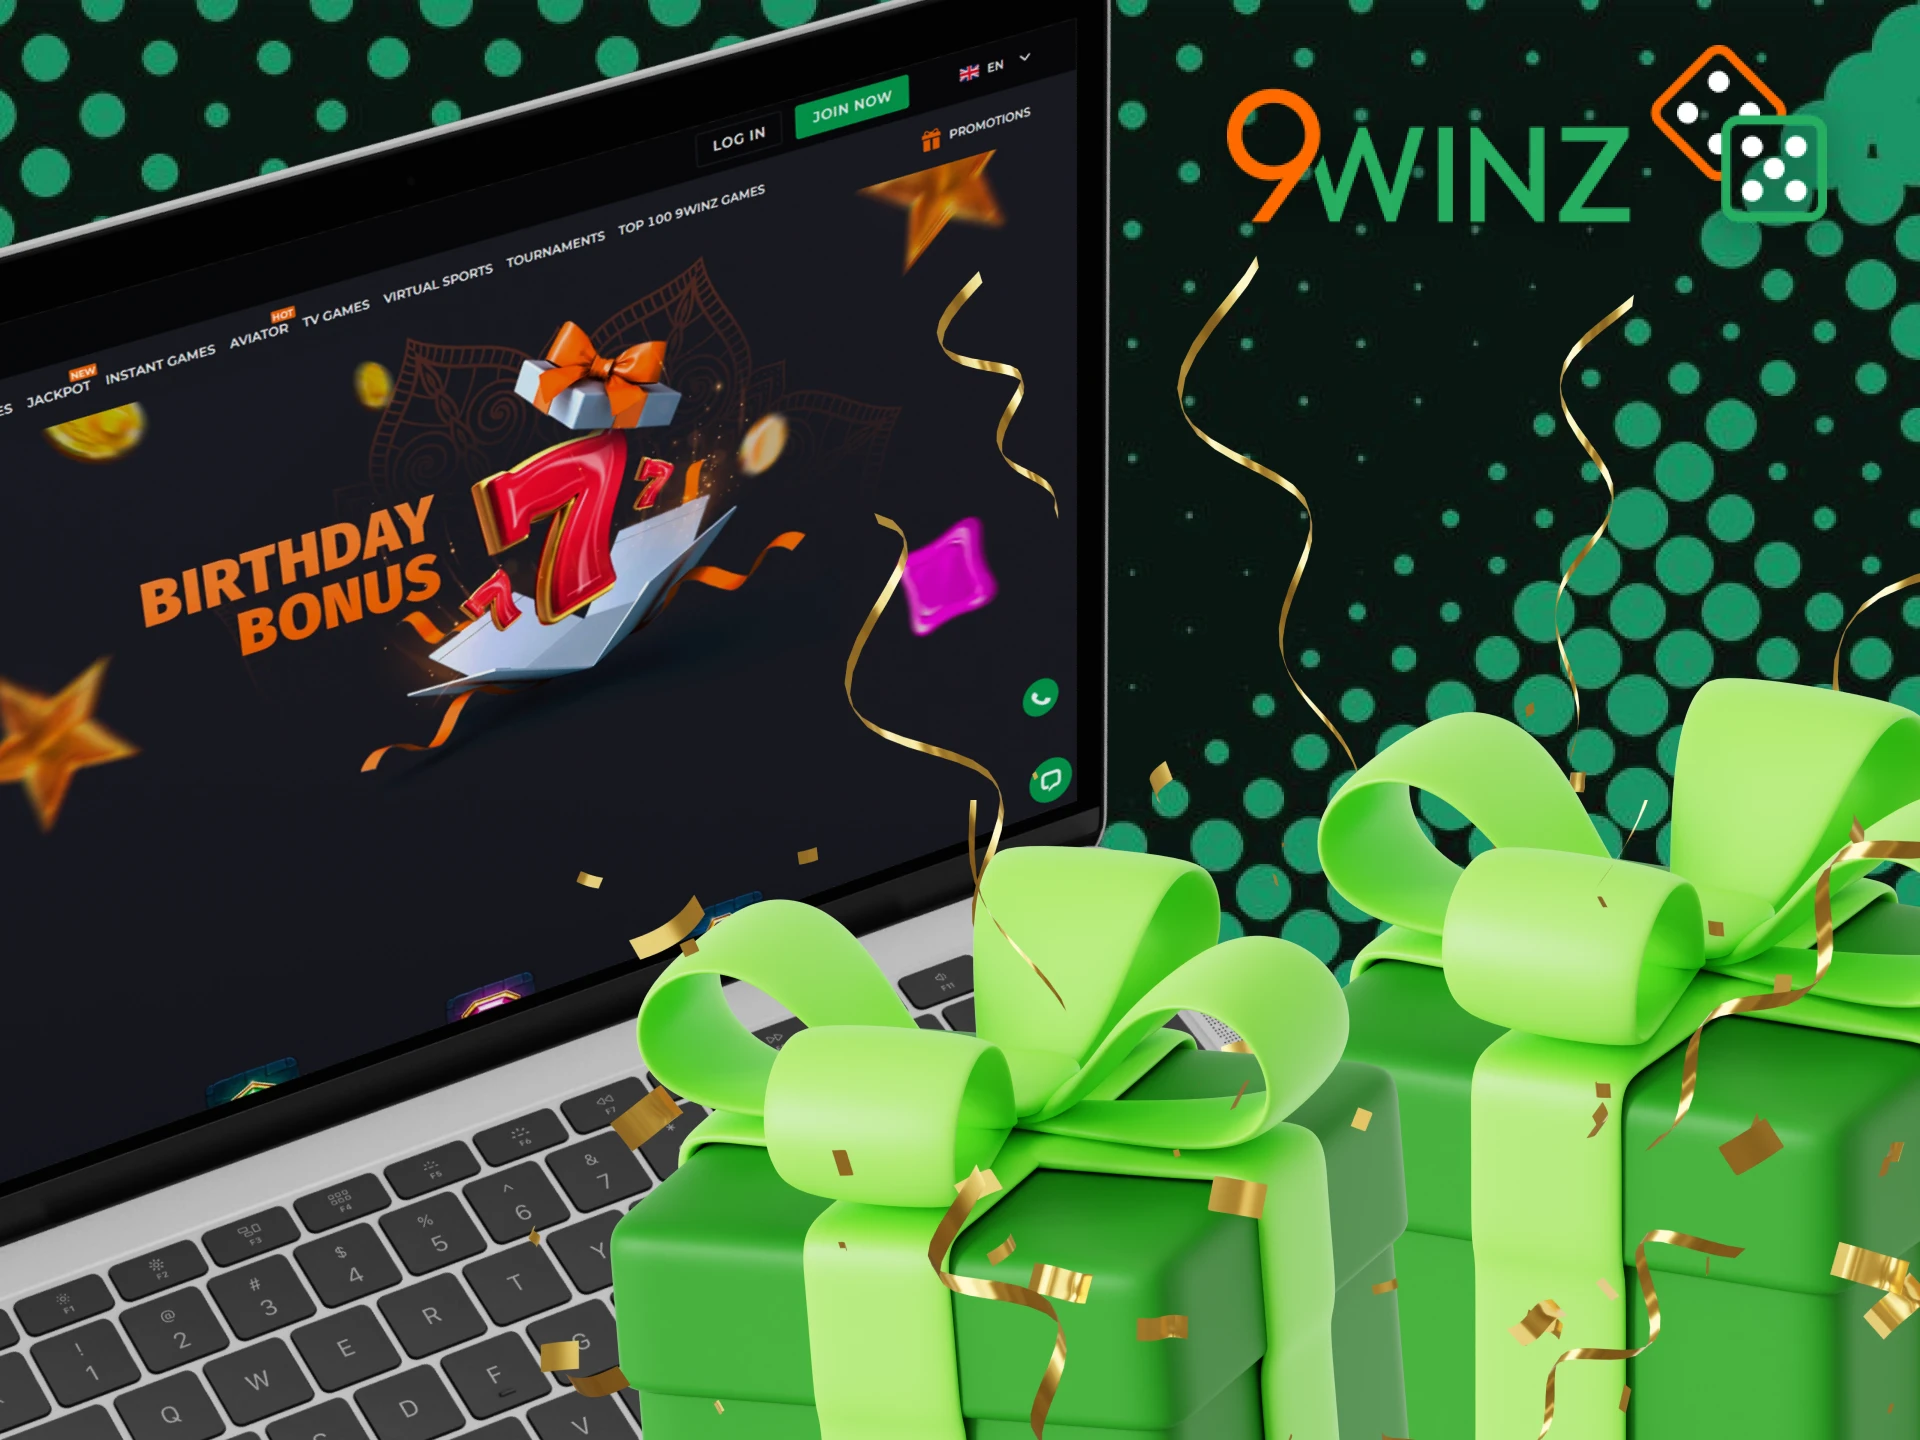 After verification at 9Winz casino, you can count on a Birthday bonus.